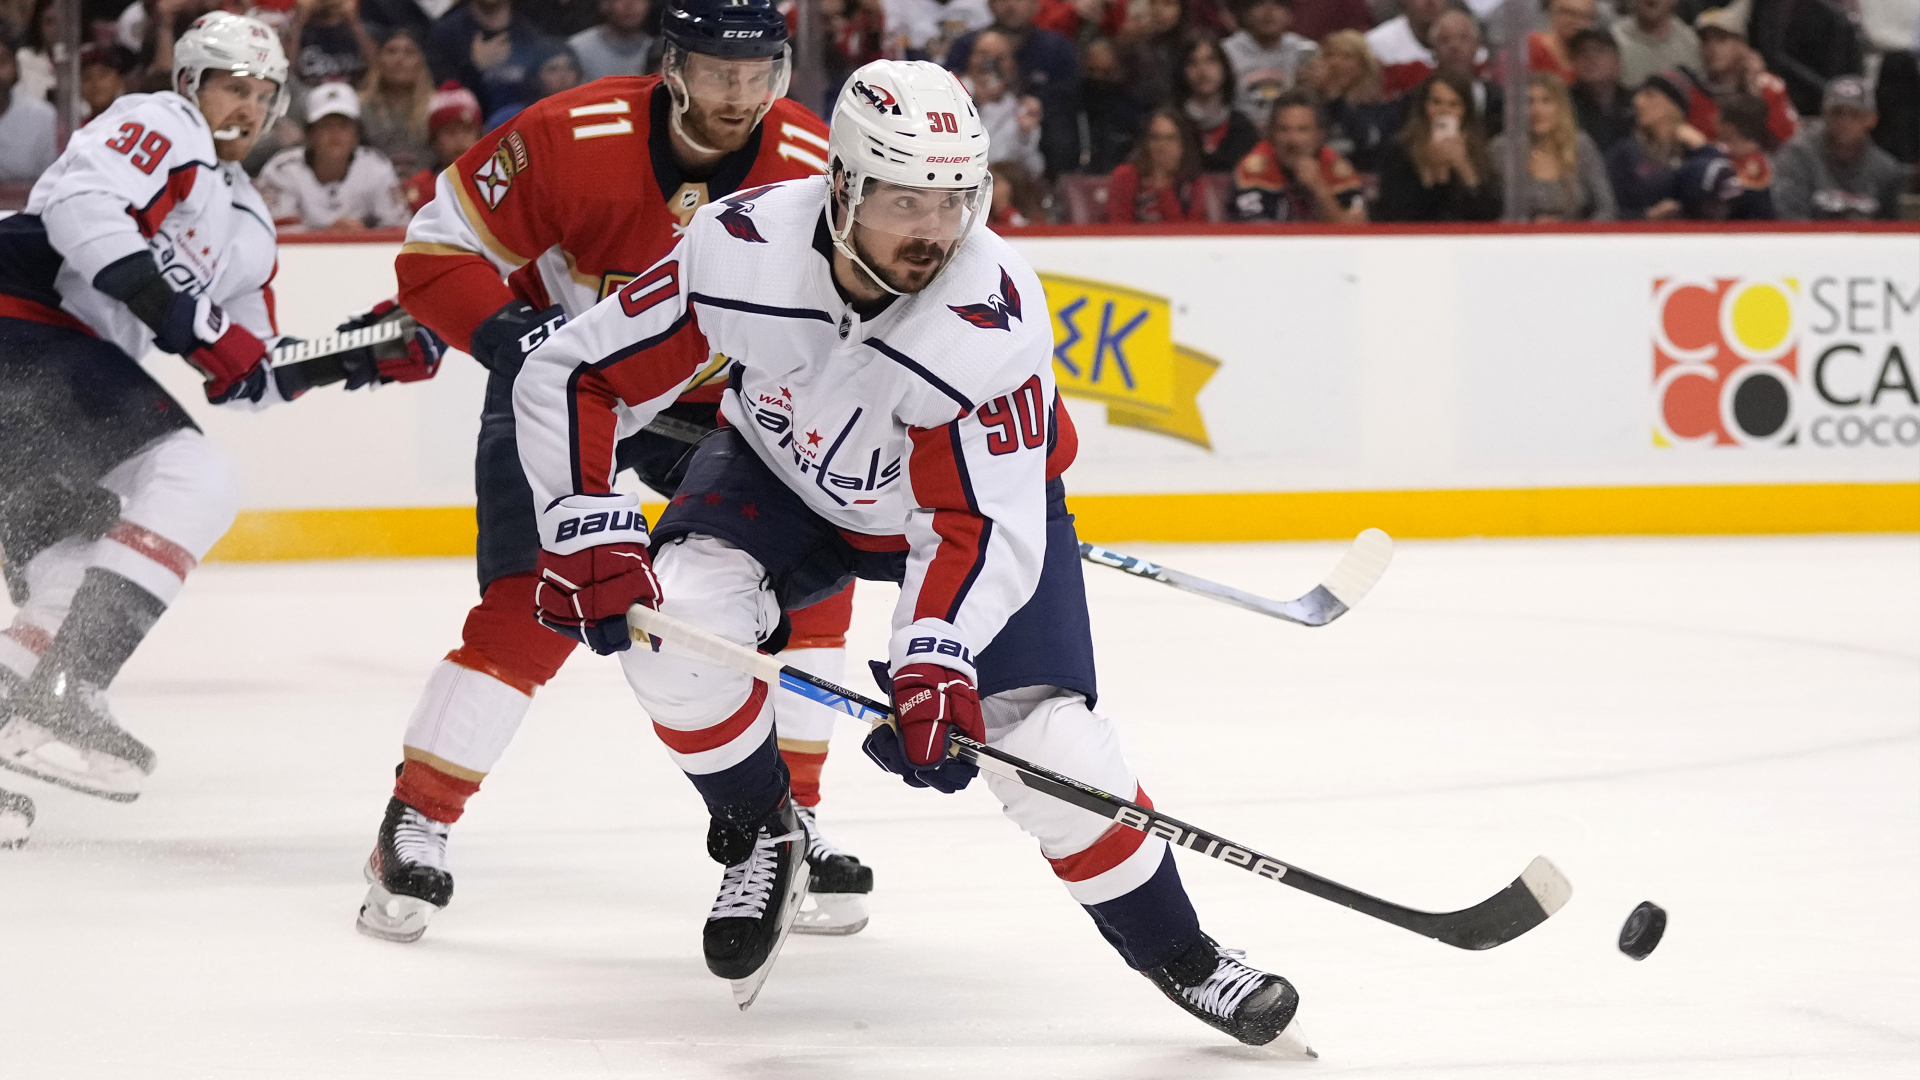 Capitals Re-Sign Marcus Johansson to One-Year, $1.1 Million Deal